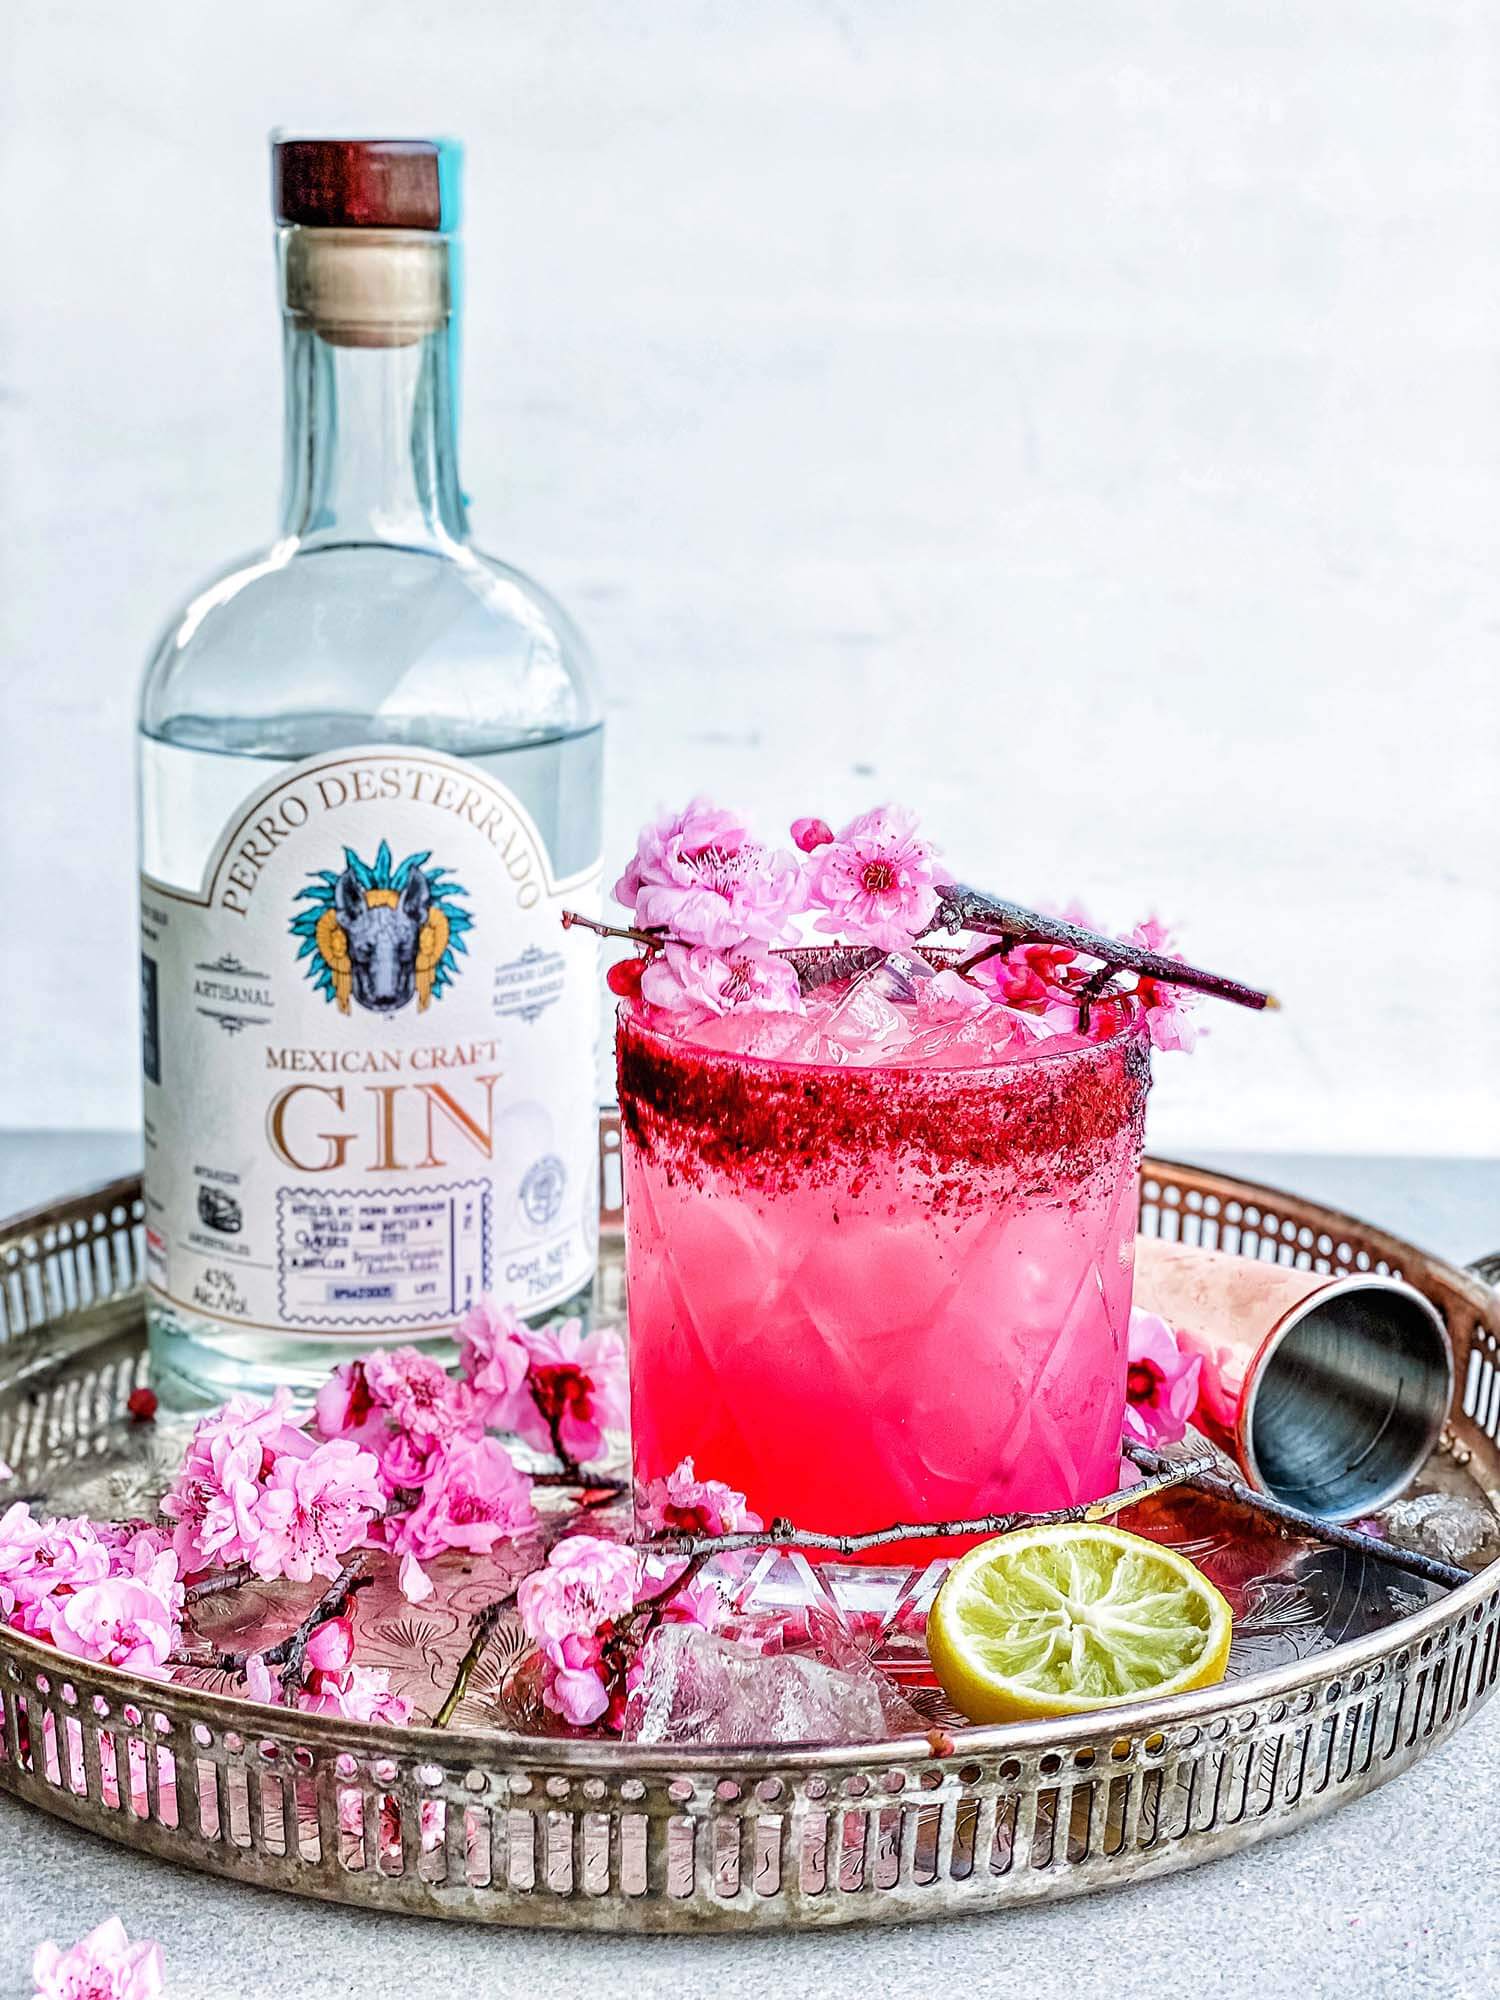 Product image for “Mexican Gin Margarita Cocktail Kit”